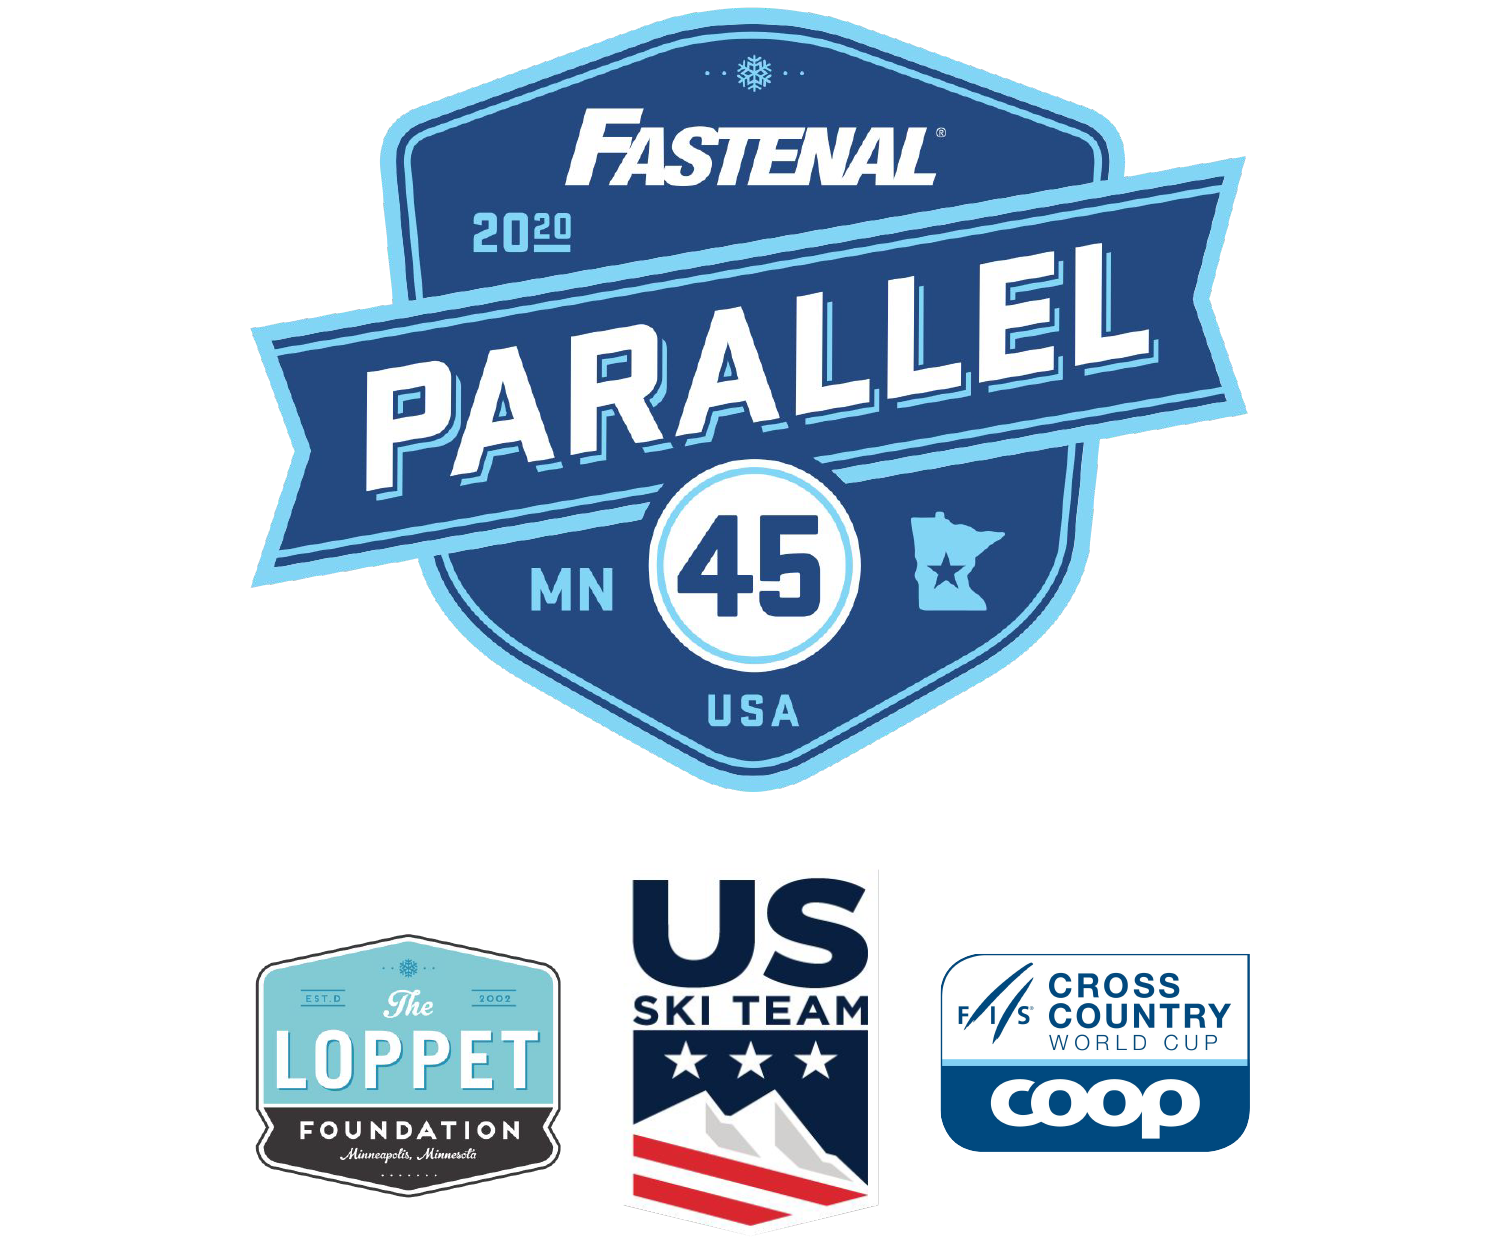 Fastenal Parallel 45 Festival and World Cup Cancelled (Press Release)